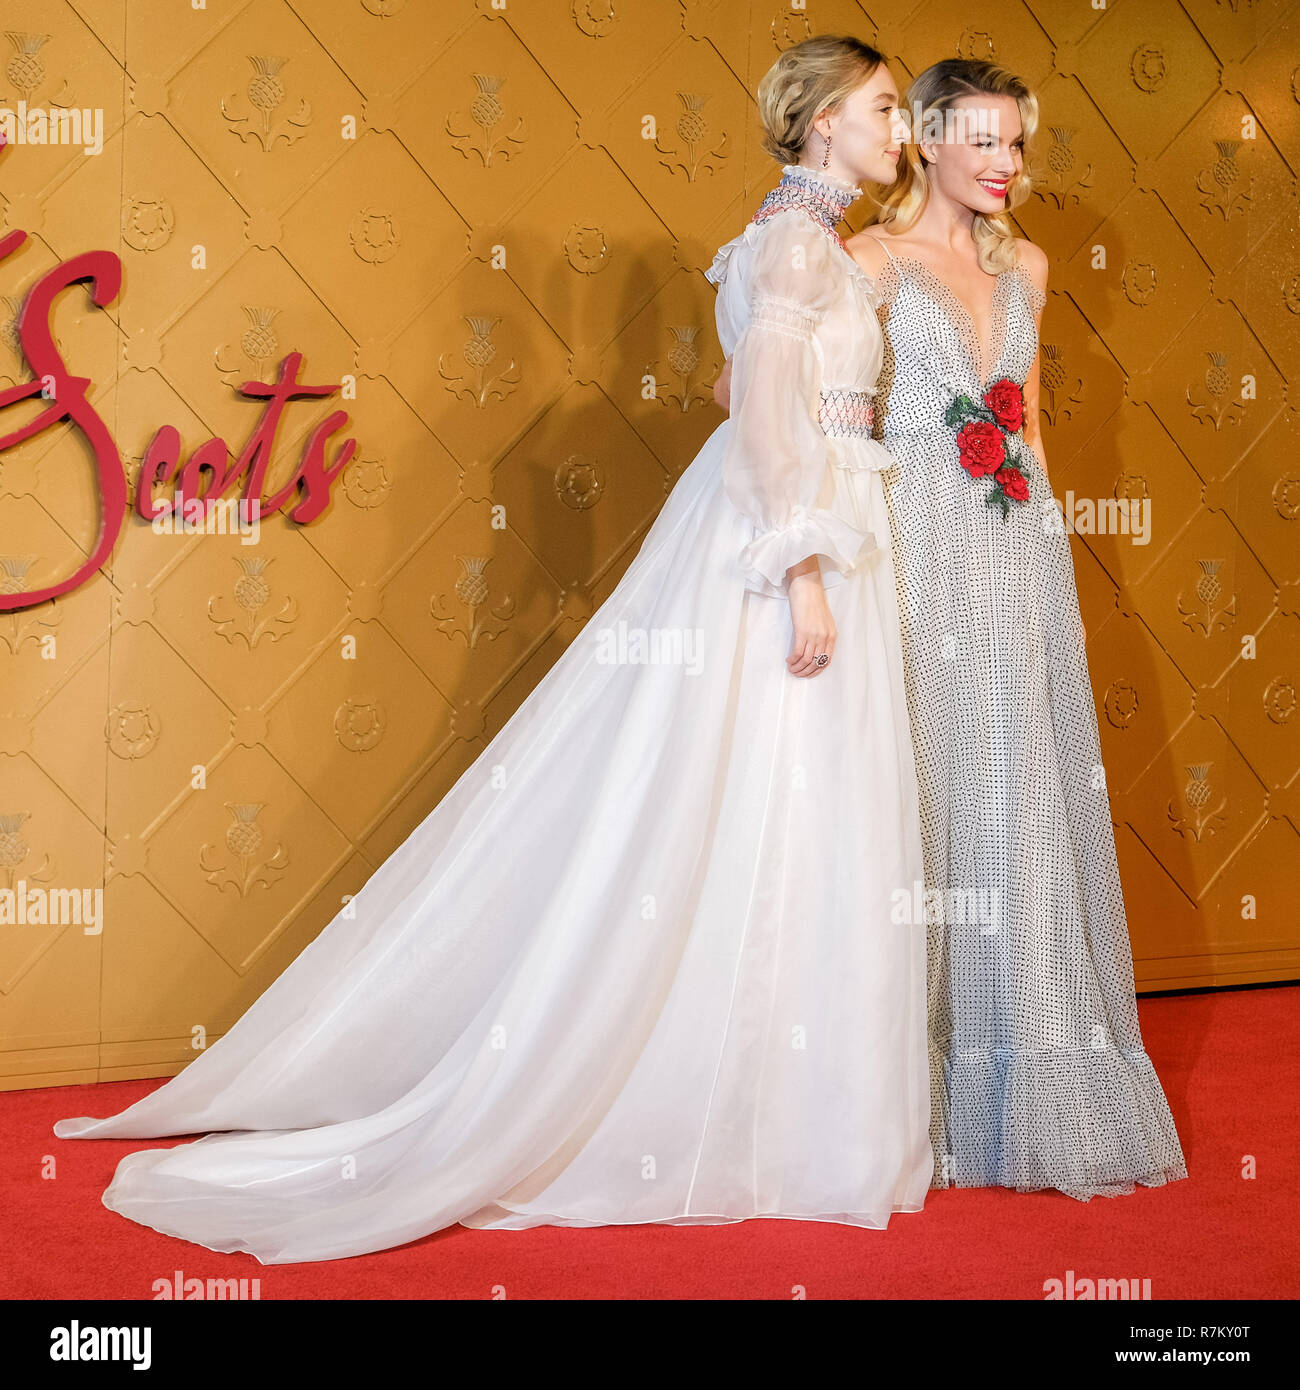 London, UK. 10th Dec 2018. Saoirse Ronan and Margot Robbie at Mary Queen Of Scots European Premiere on Monday 10 December 2018 held at Cineworld Leicester Square, London. Pictured: Saoirse Ronan, Margot Robbie. Credit: Julie Edwards/Alamy Live News Stock Photo